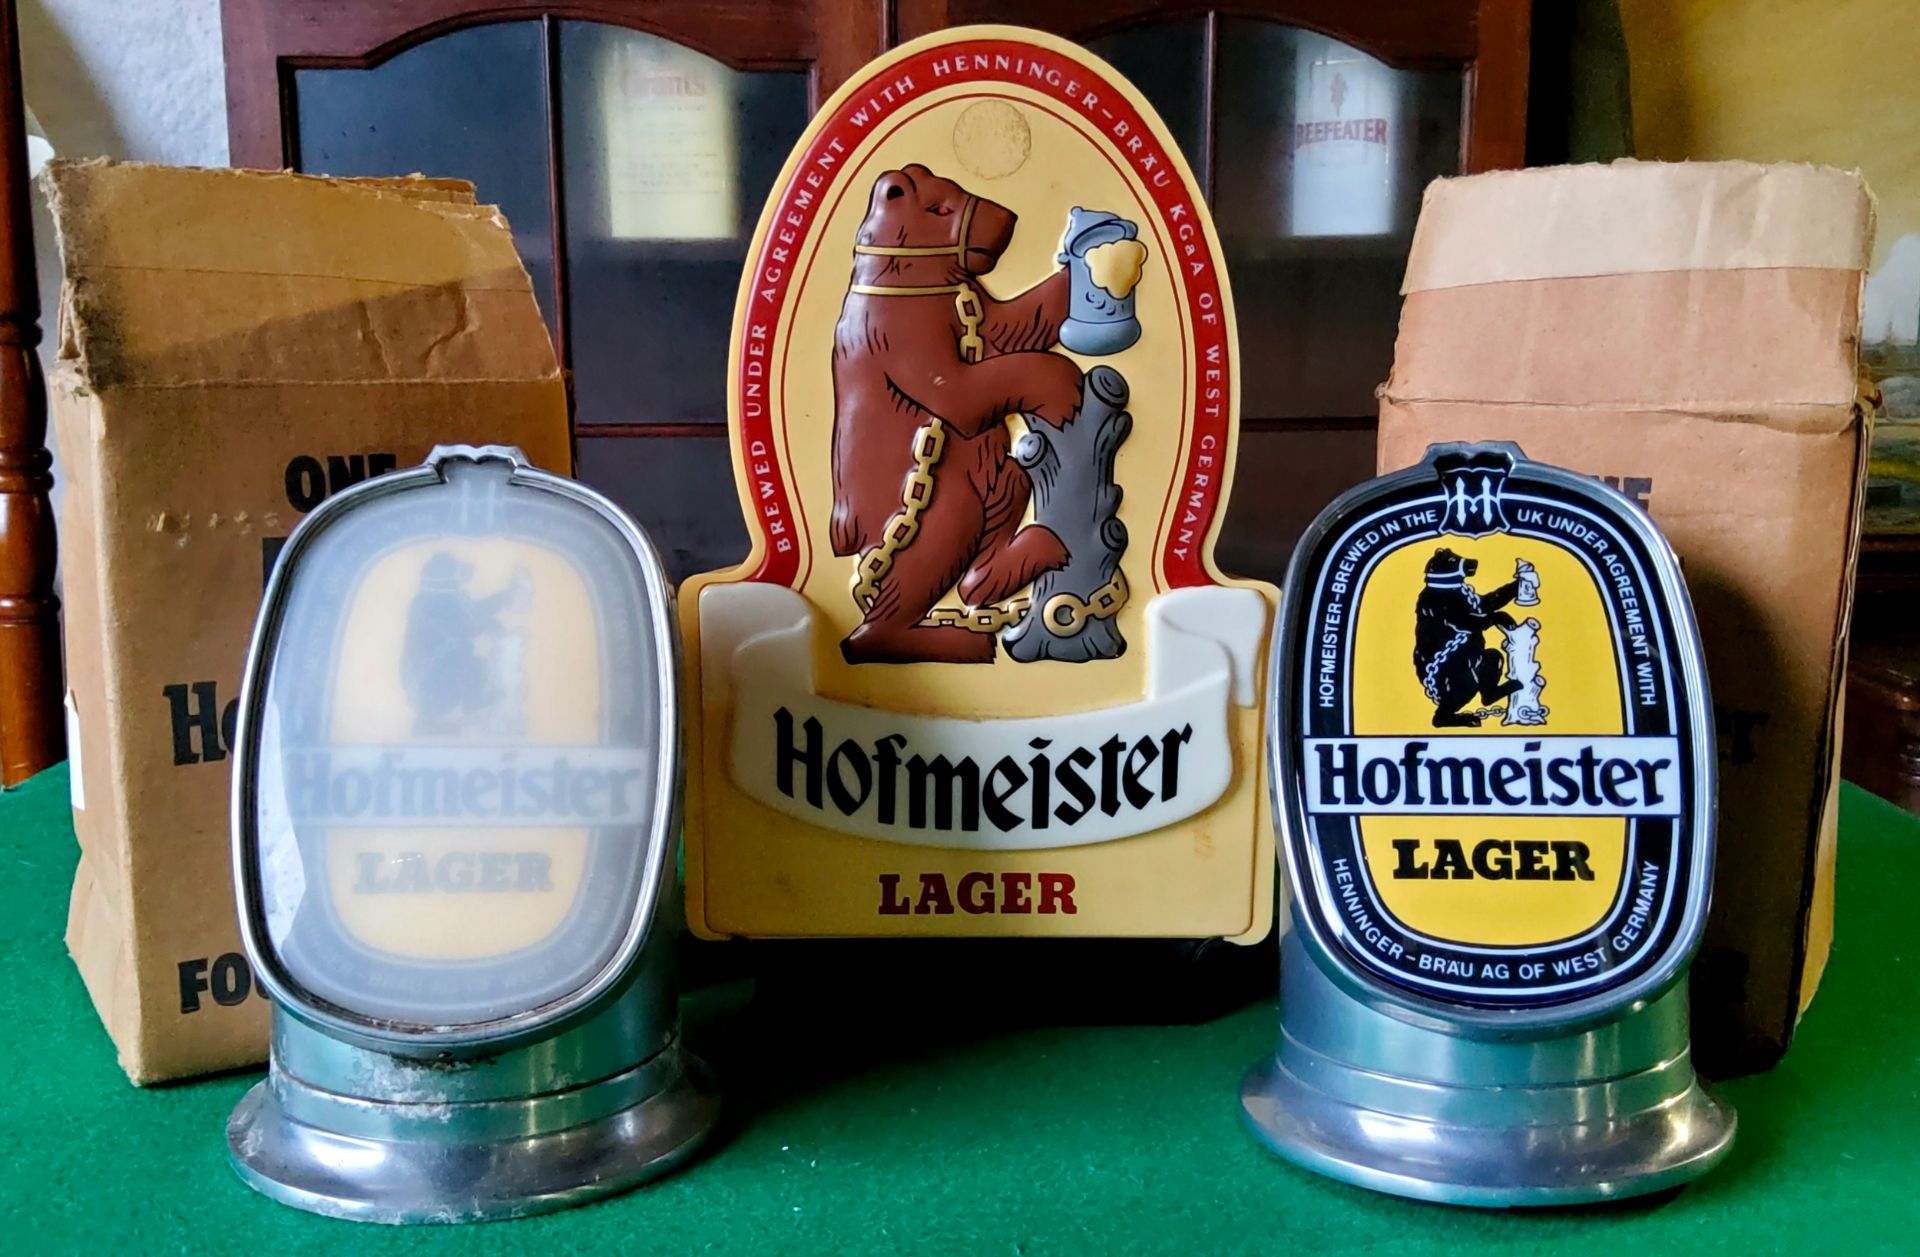 Two 1984 Hofmeister Lager mini font covers in original cardboard trade carton; a vintage plastic